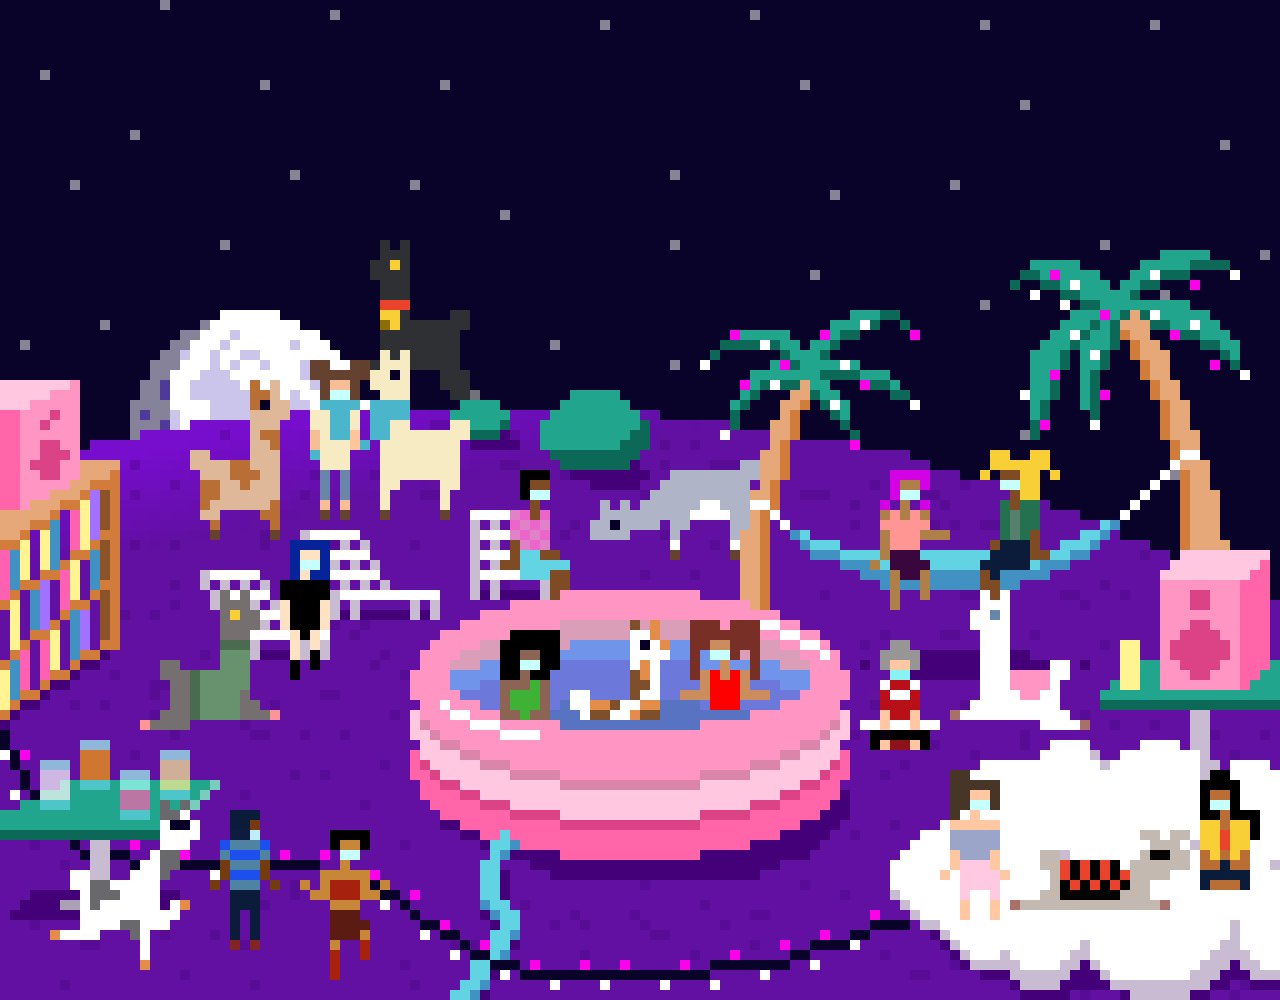 An animated work of pixel art sits inside an ornate photorealistic frame. The animation is a night scene of a purple grassy knoll set before a large moon on the horizon, with stars twinkling above. On the knoll are various relaxing party elements — stereo speakers on a bookshelf and table, people petting llamas, two people and a llama floating in a large pink kiddie pool, people and llamas dancing by the drinks table, two people chatting on a bright aqua hammock, a grandma sitting with a llama, and two people petting a snoozing llama on a fluffy cloud sofa.